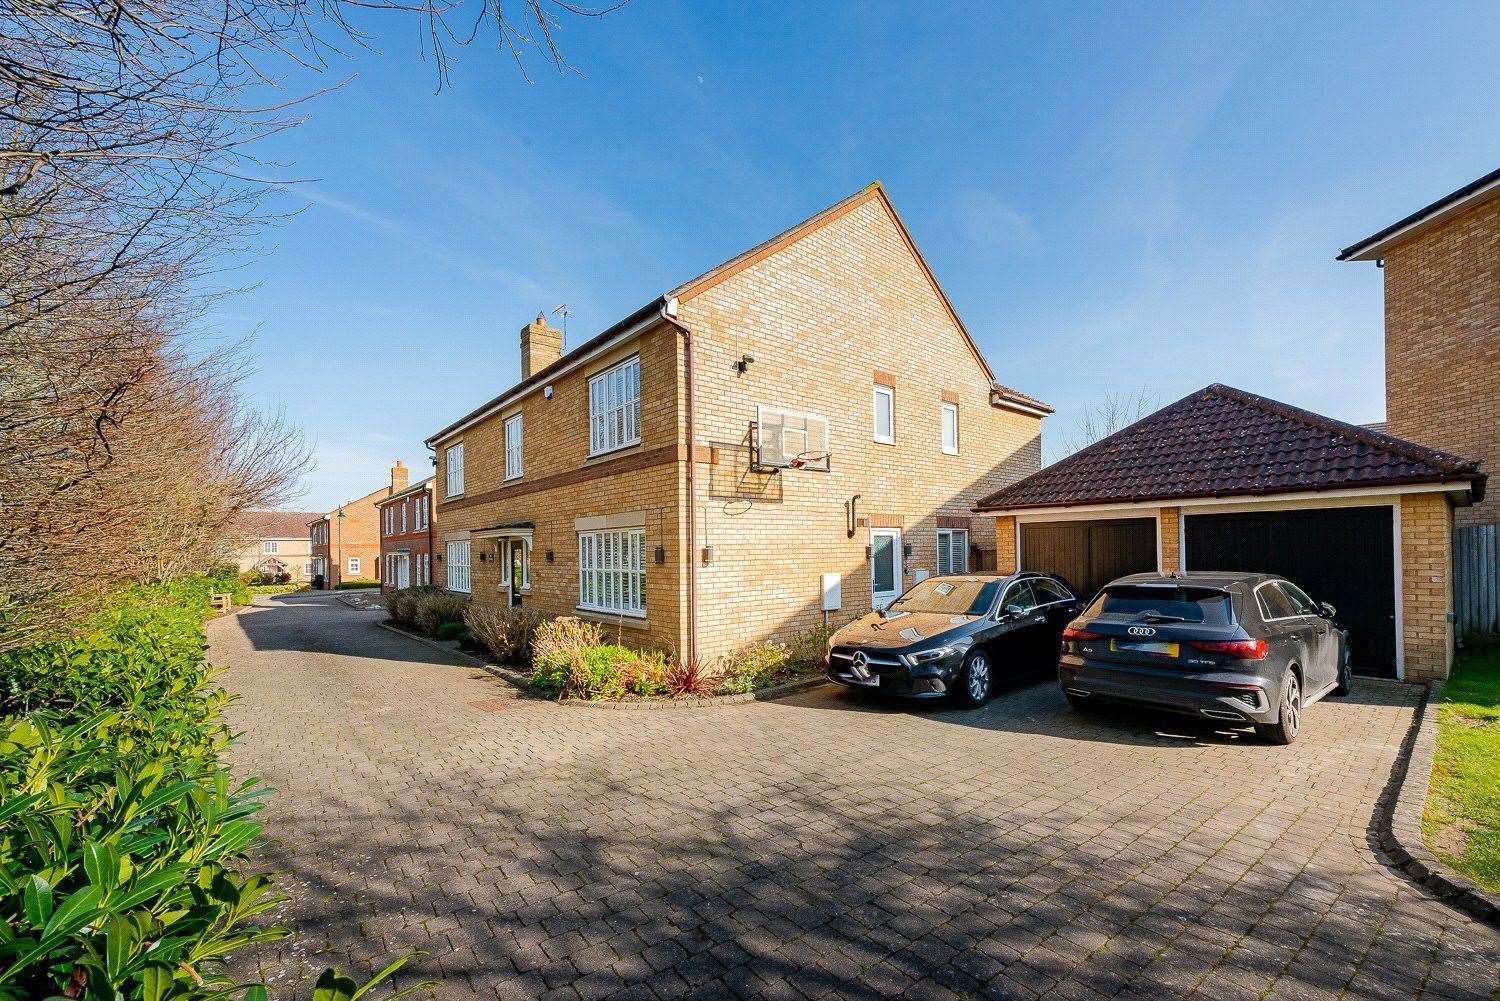 The five-bedroom detached home includes a double garage